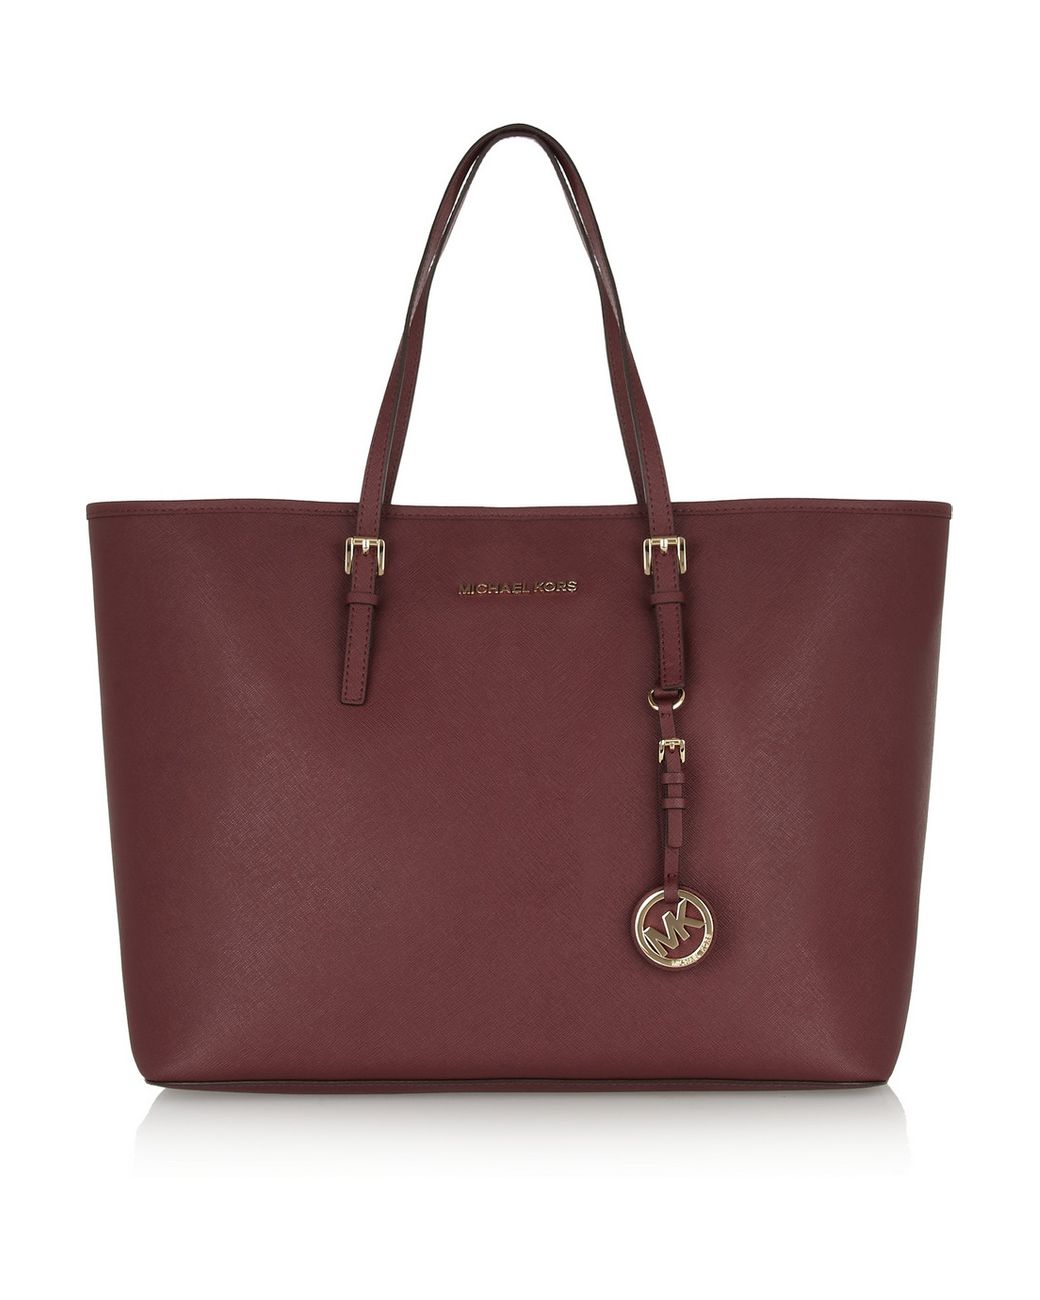 Michael Kors Jet Set Medium Mulberry Leather Front Zip Chain Tote Bag –  AUMI 4